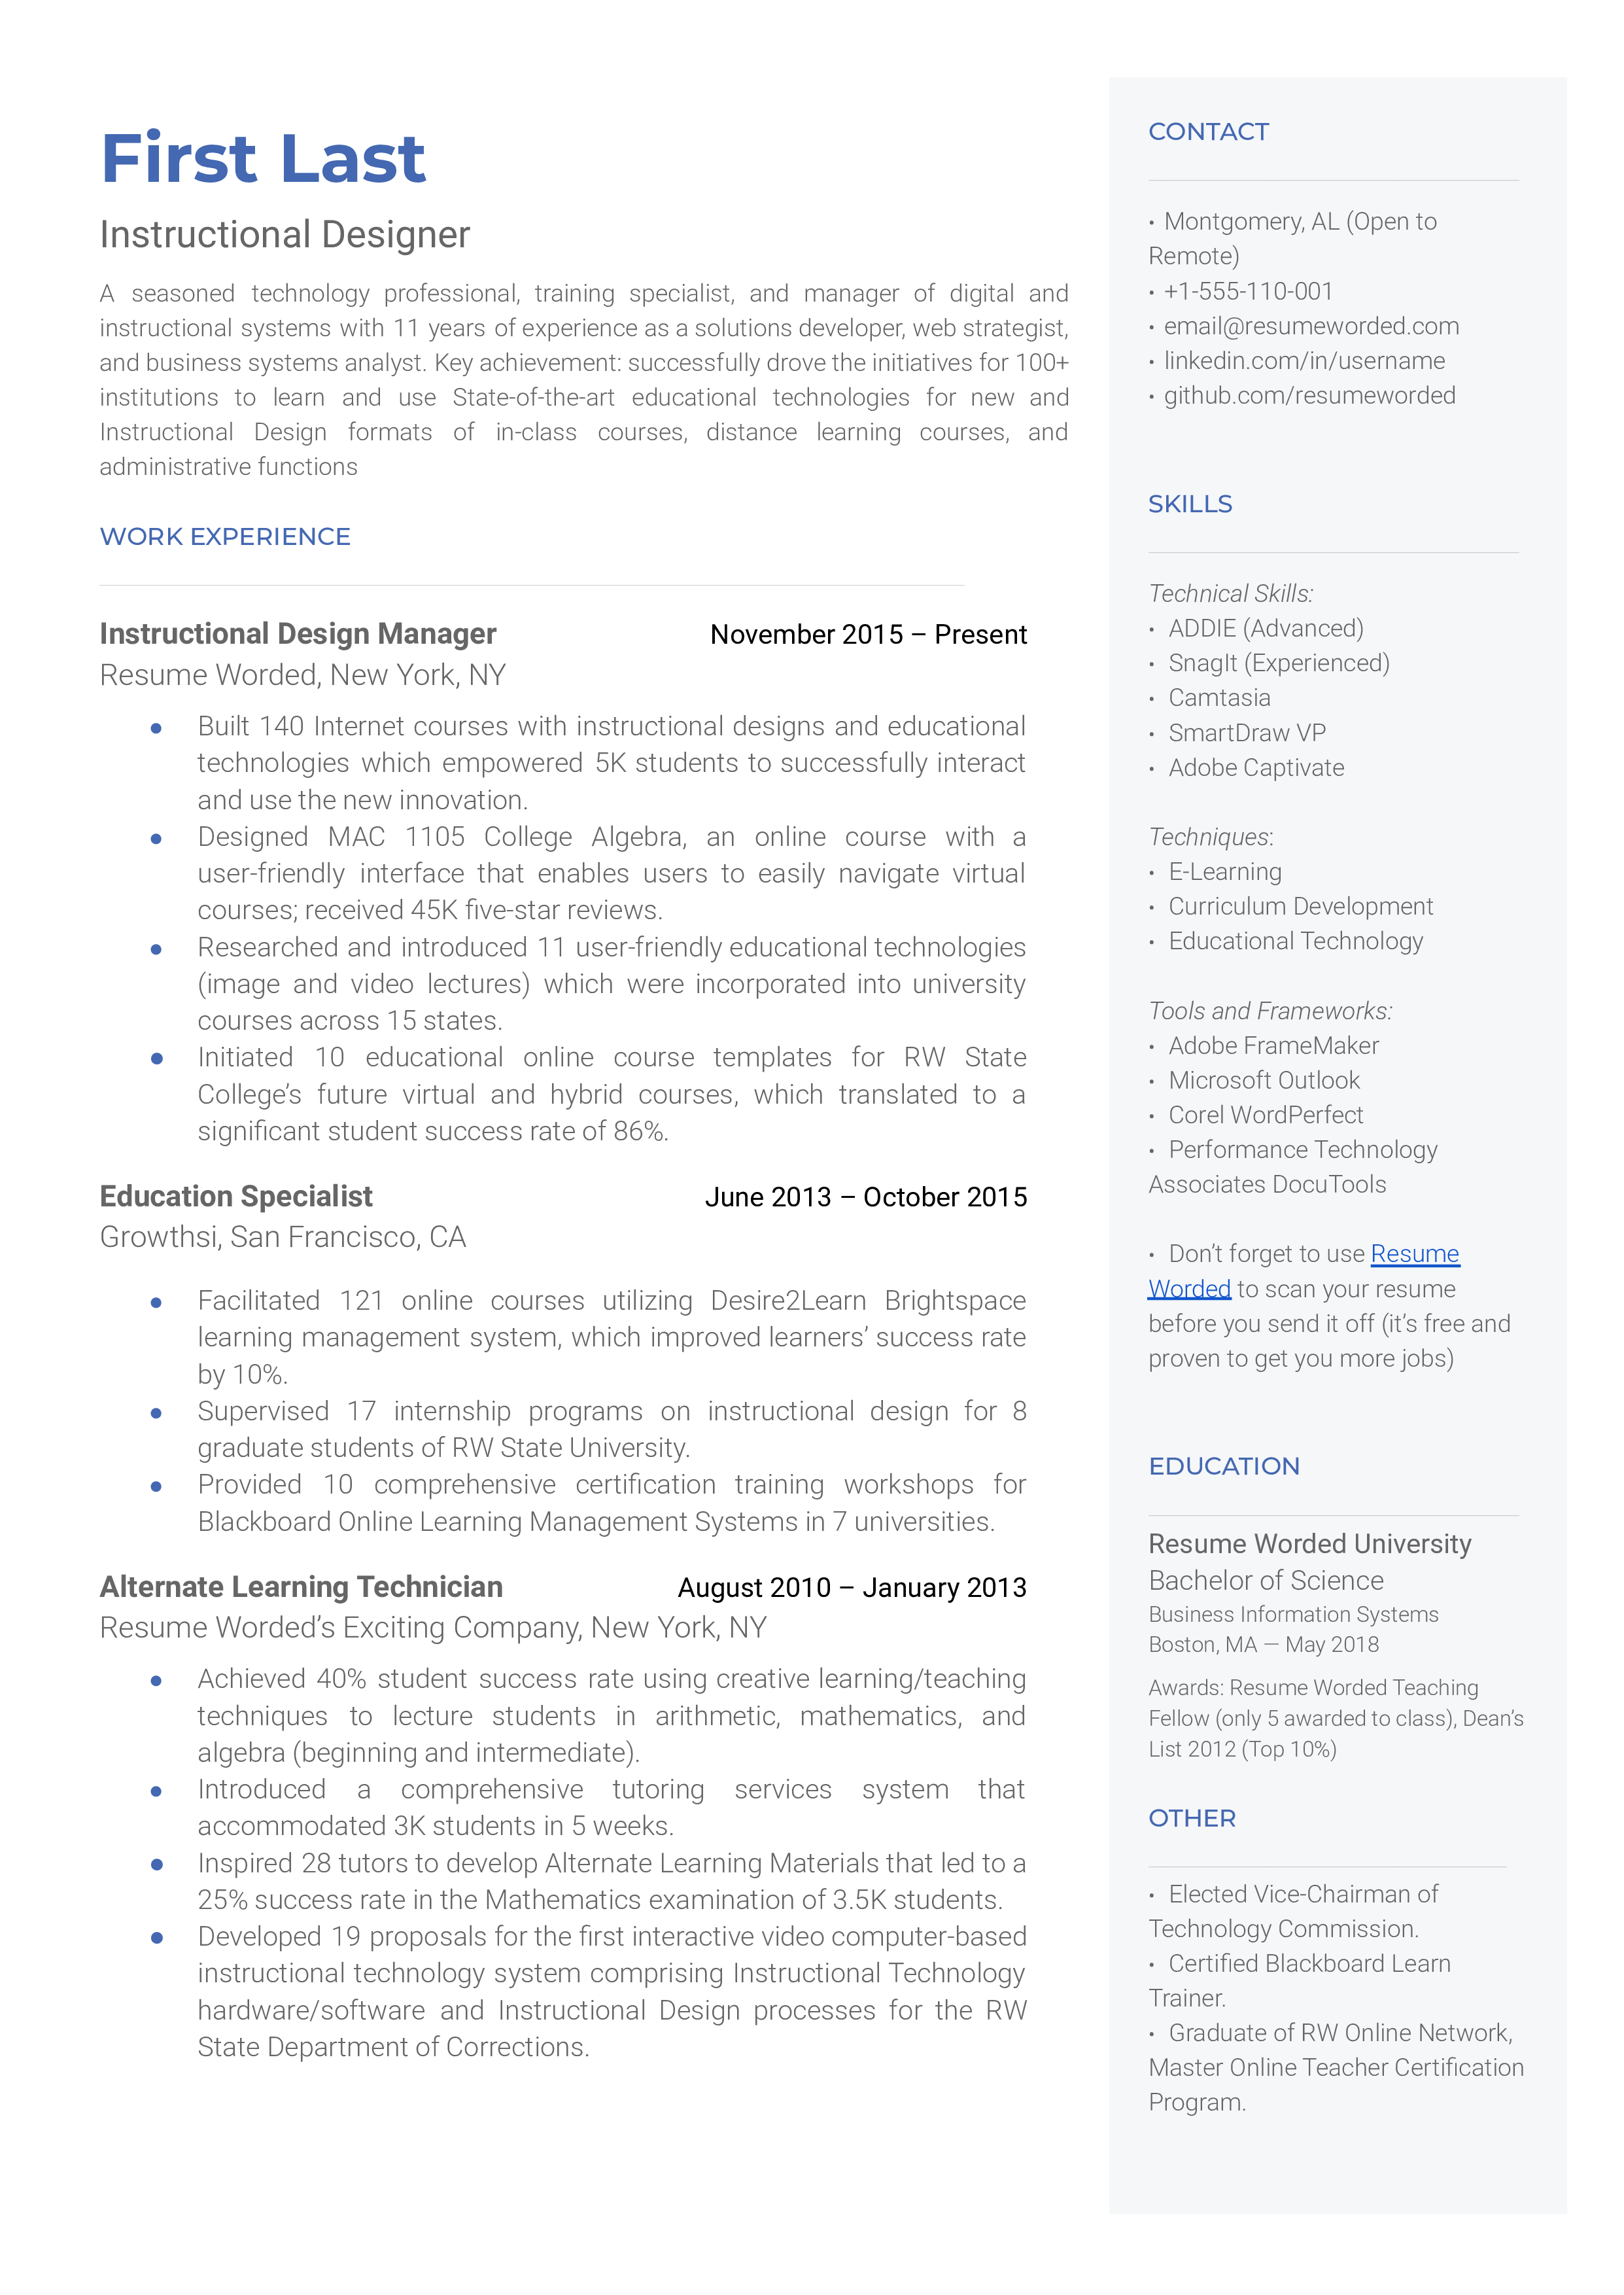 An instructional designer resume showcasing experience and technical skills in developing online courses and educational technologies.